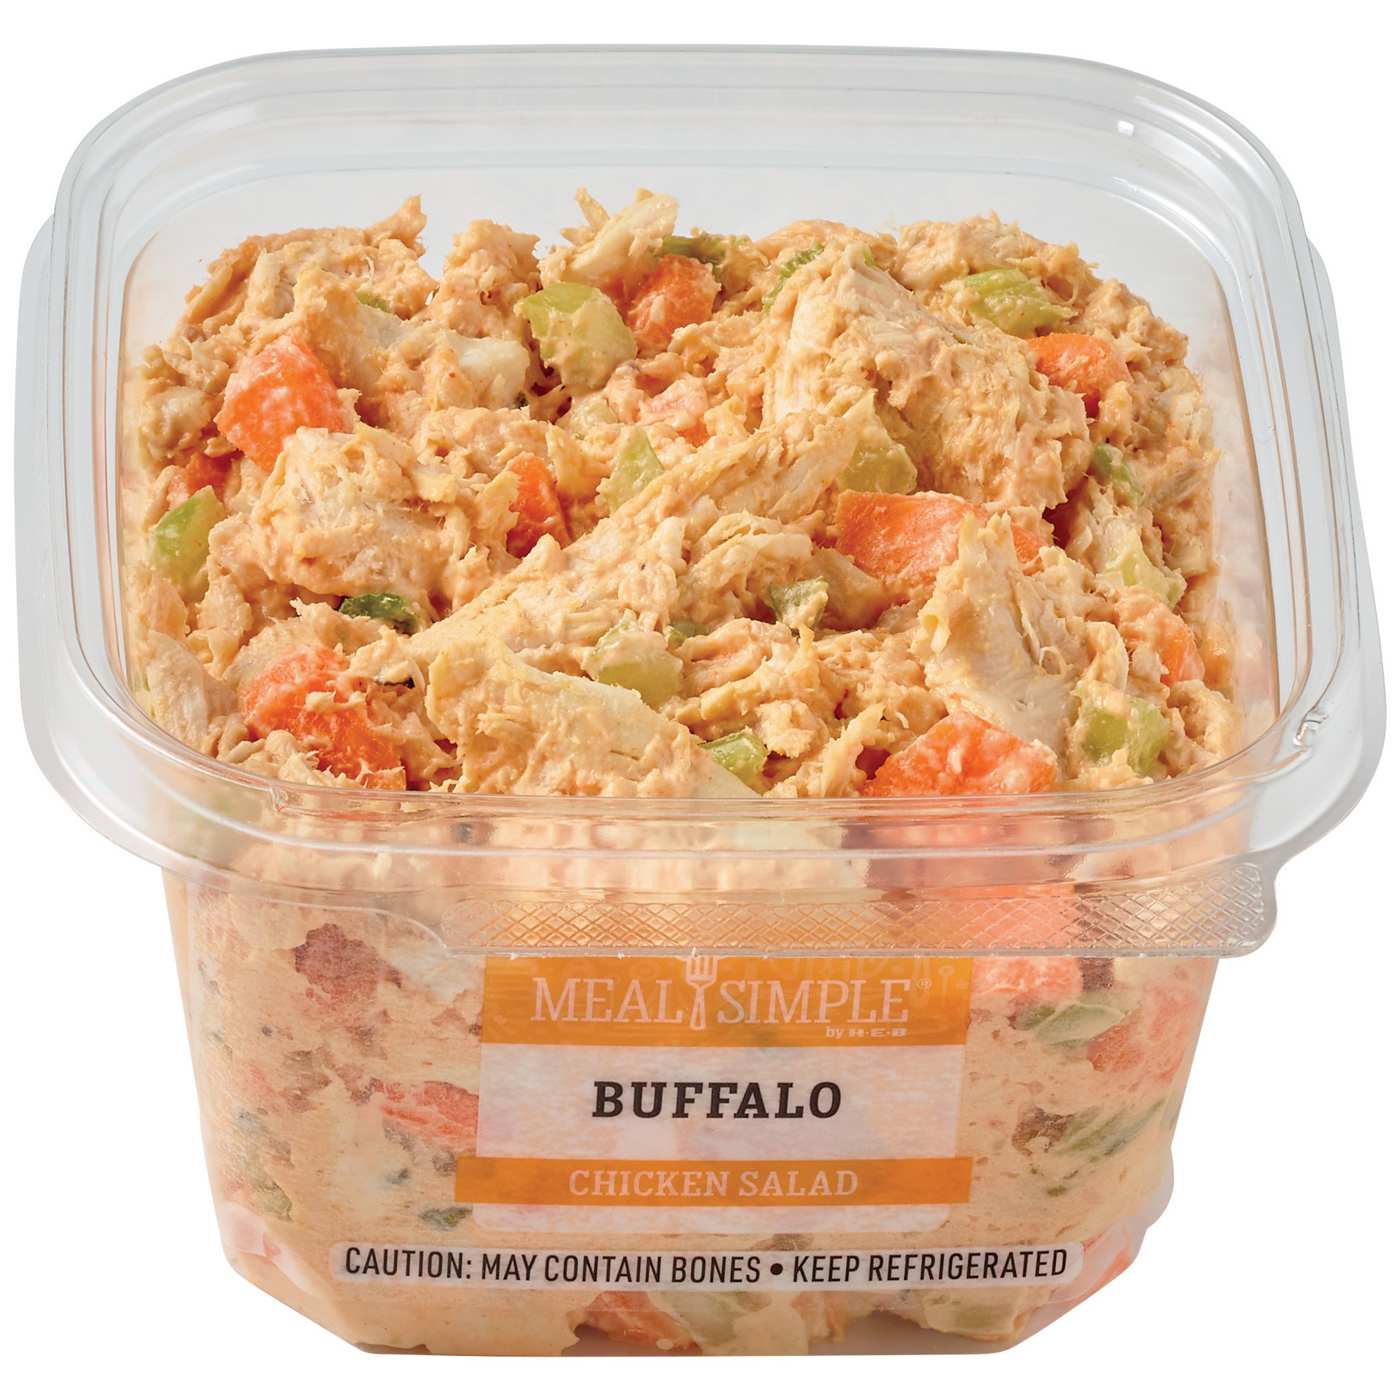 Meal Simple by H-E-B Buffalo Chicken Salad; image 1 of 3